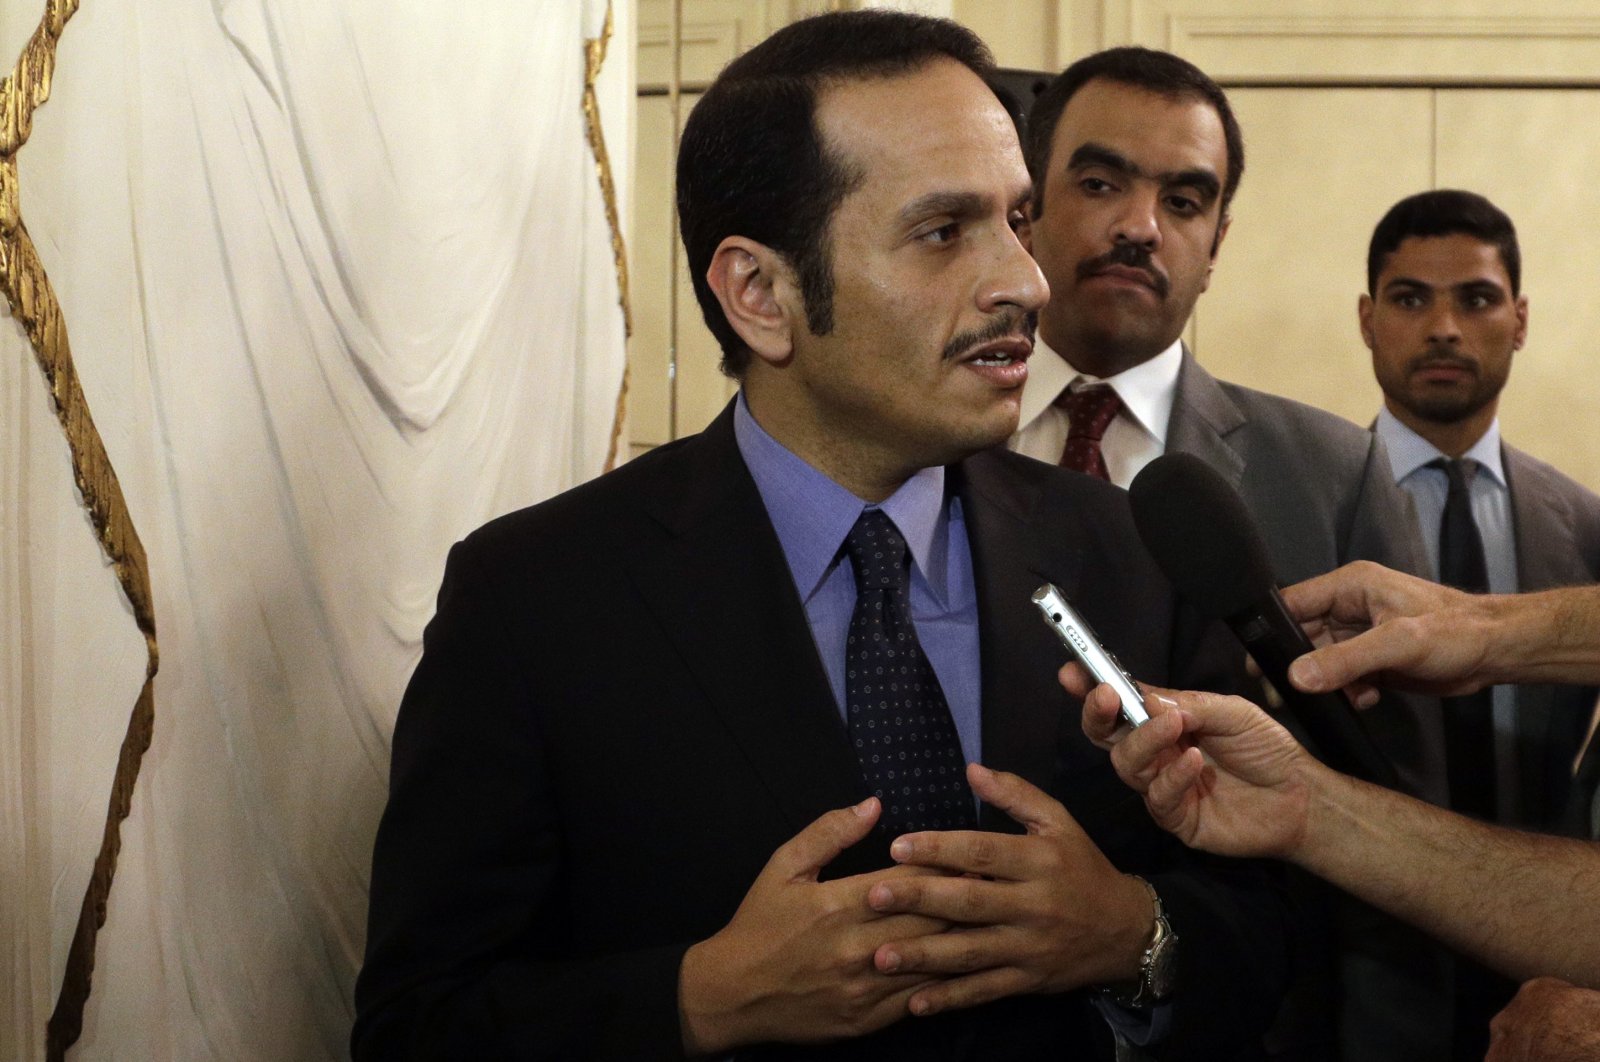 Qatari Foreign Minister Sheikh Mohammed bin Abdulrahman Al Thani talks to journalists during a press conference in Rome, Italy, July 1, 2017. (AP Photo)